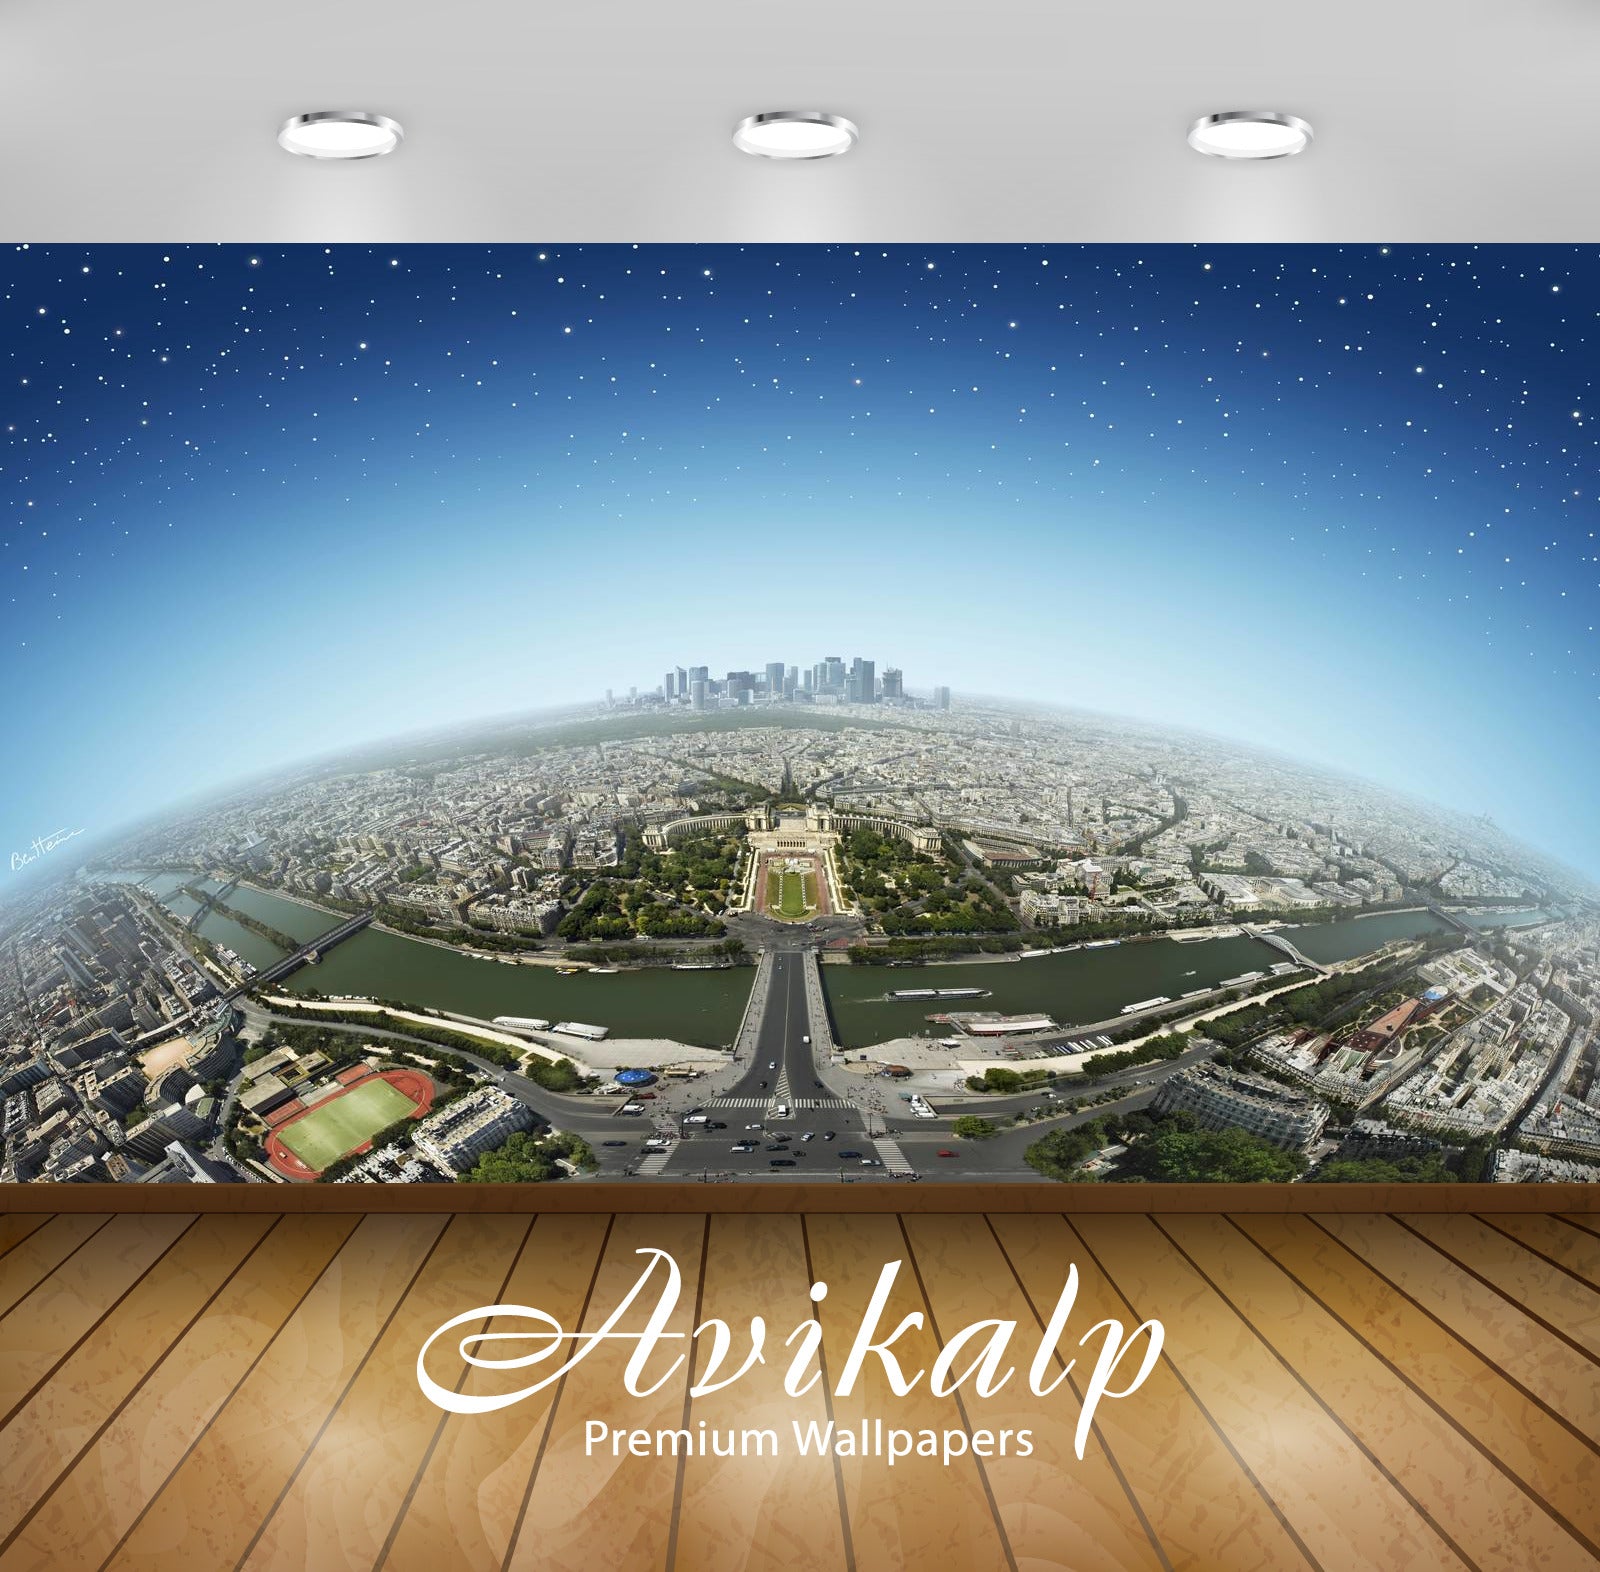 Avikalp Exclusive Awi1375 View From The Eiffel Tower Full HD Wallpapers for Living room, Hall, Kids